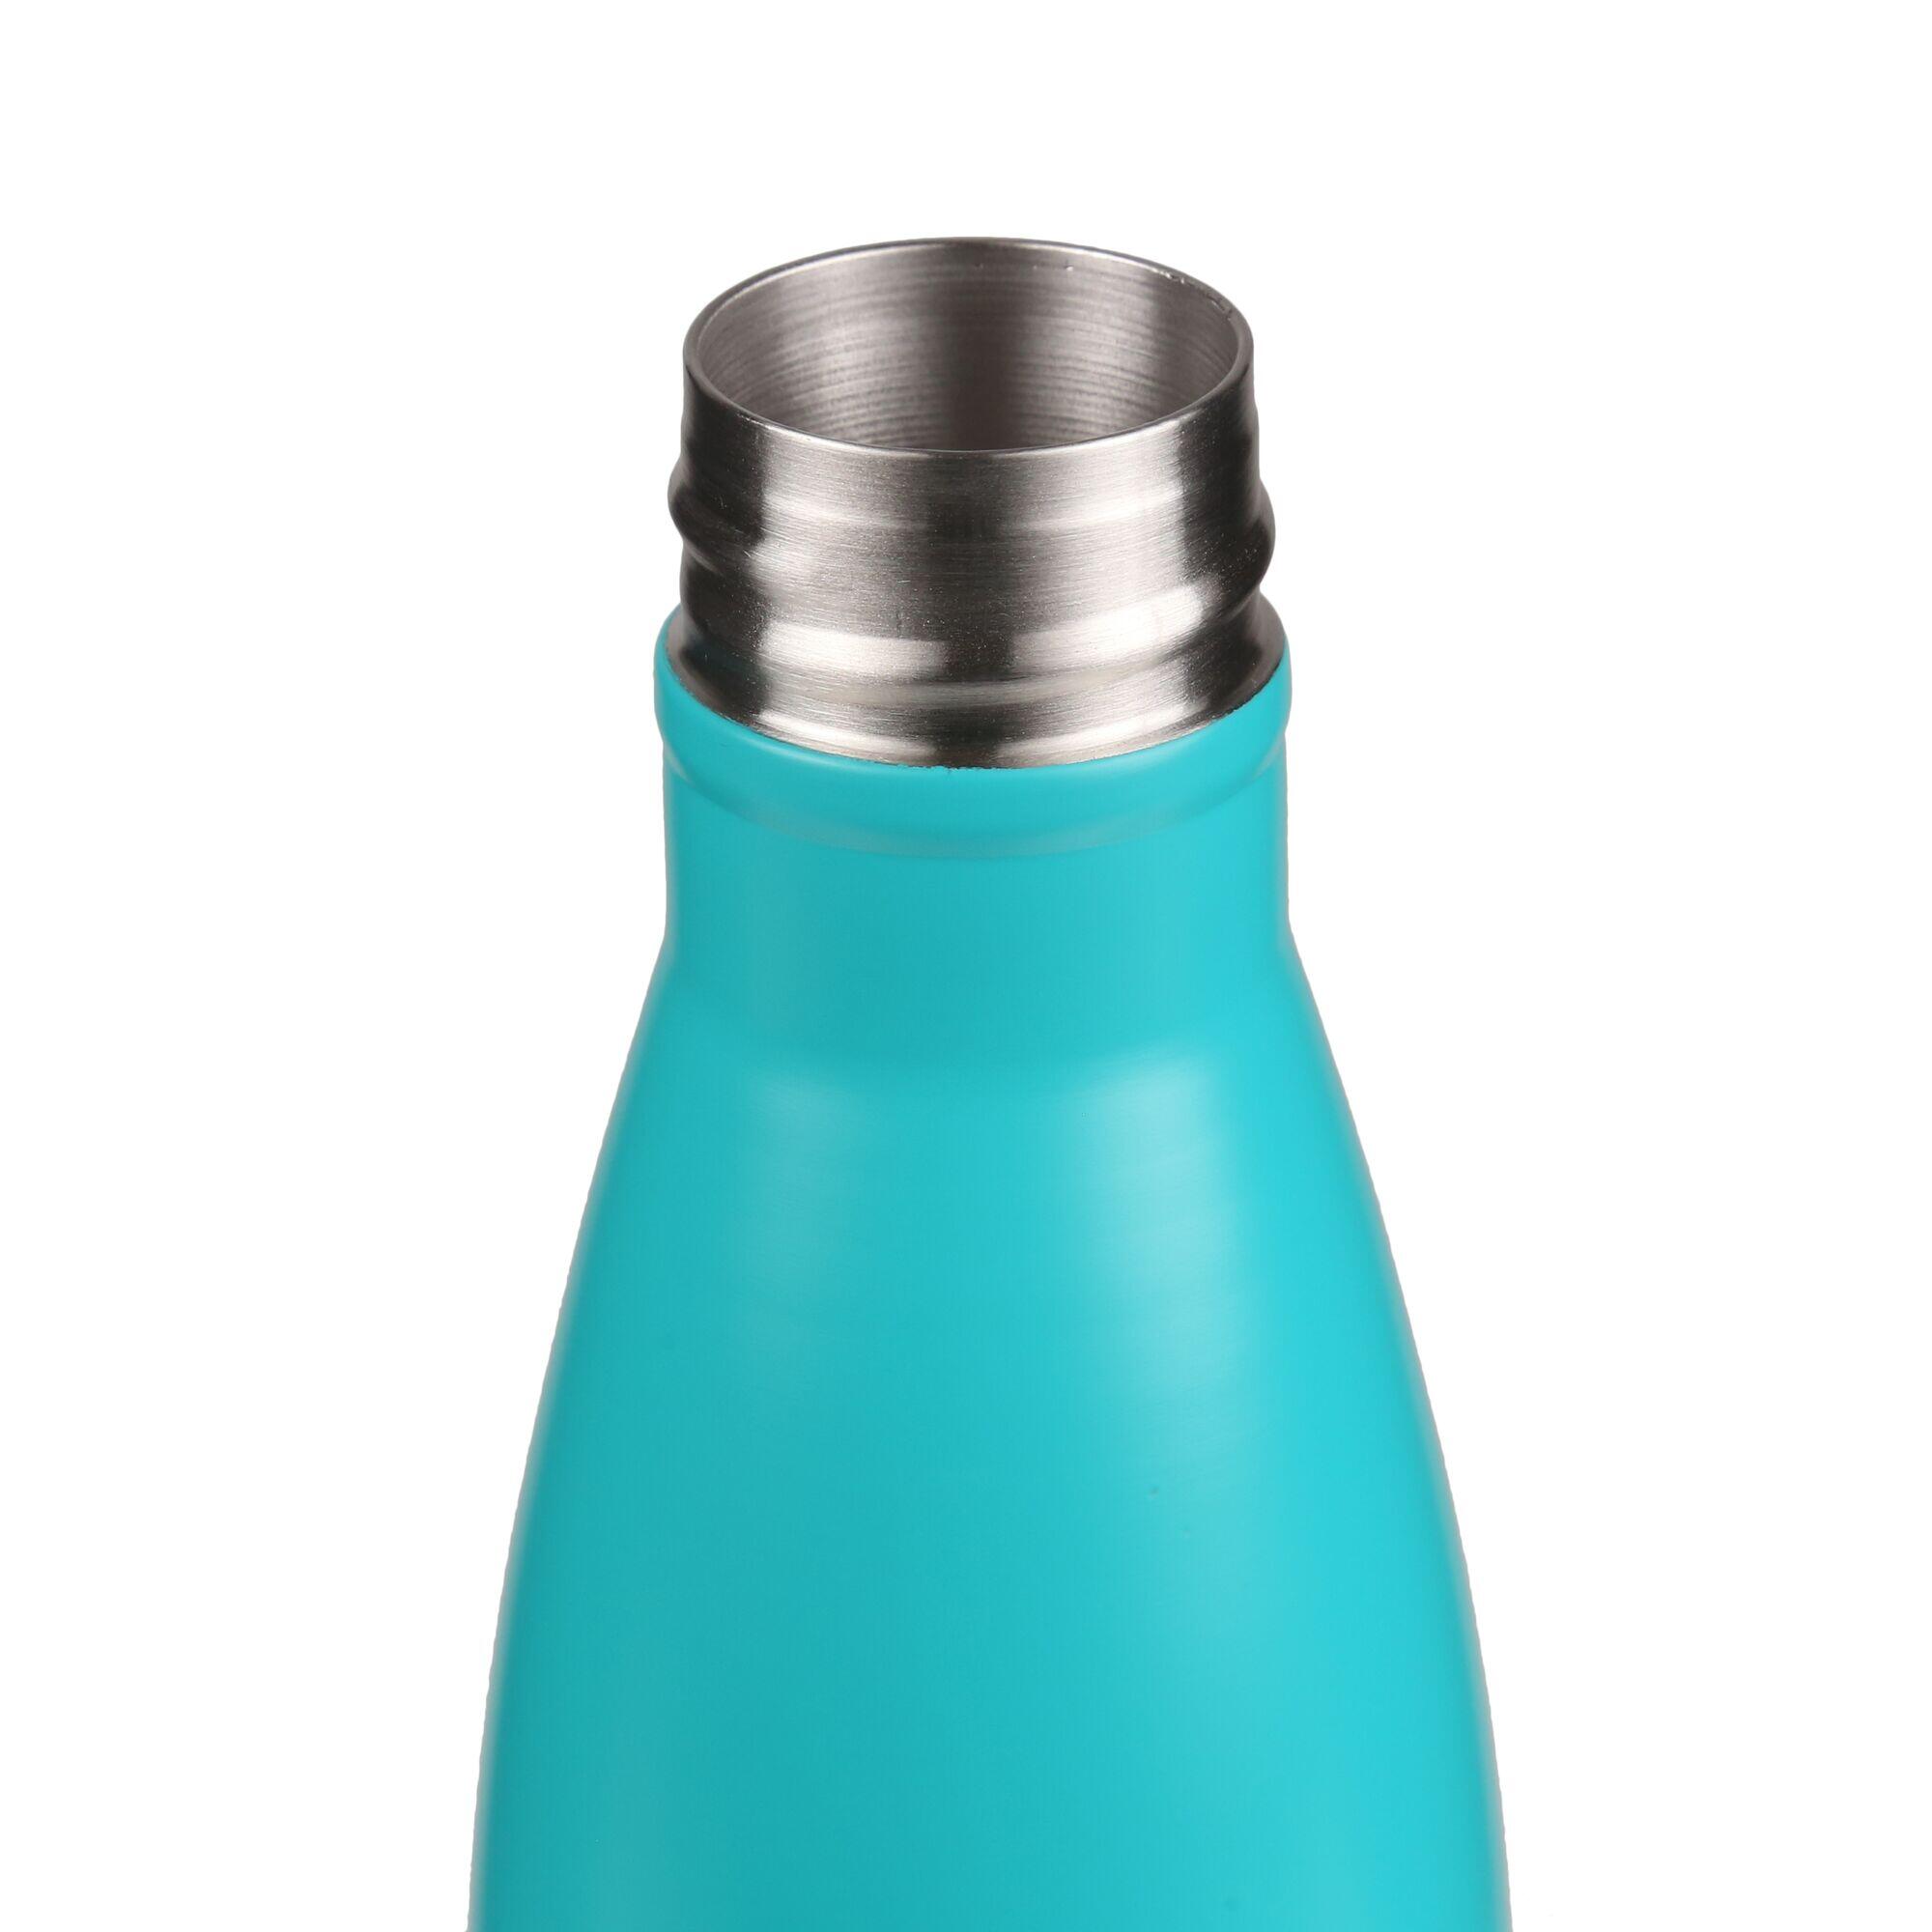 0.5L Adults' Camping Drinking Bottle - Ceramic Blue 3/5